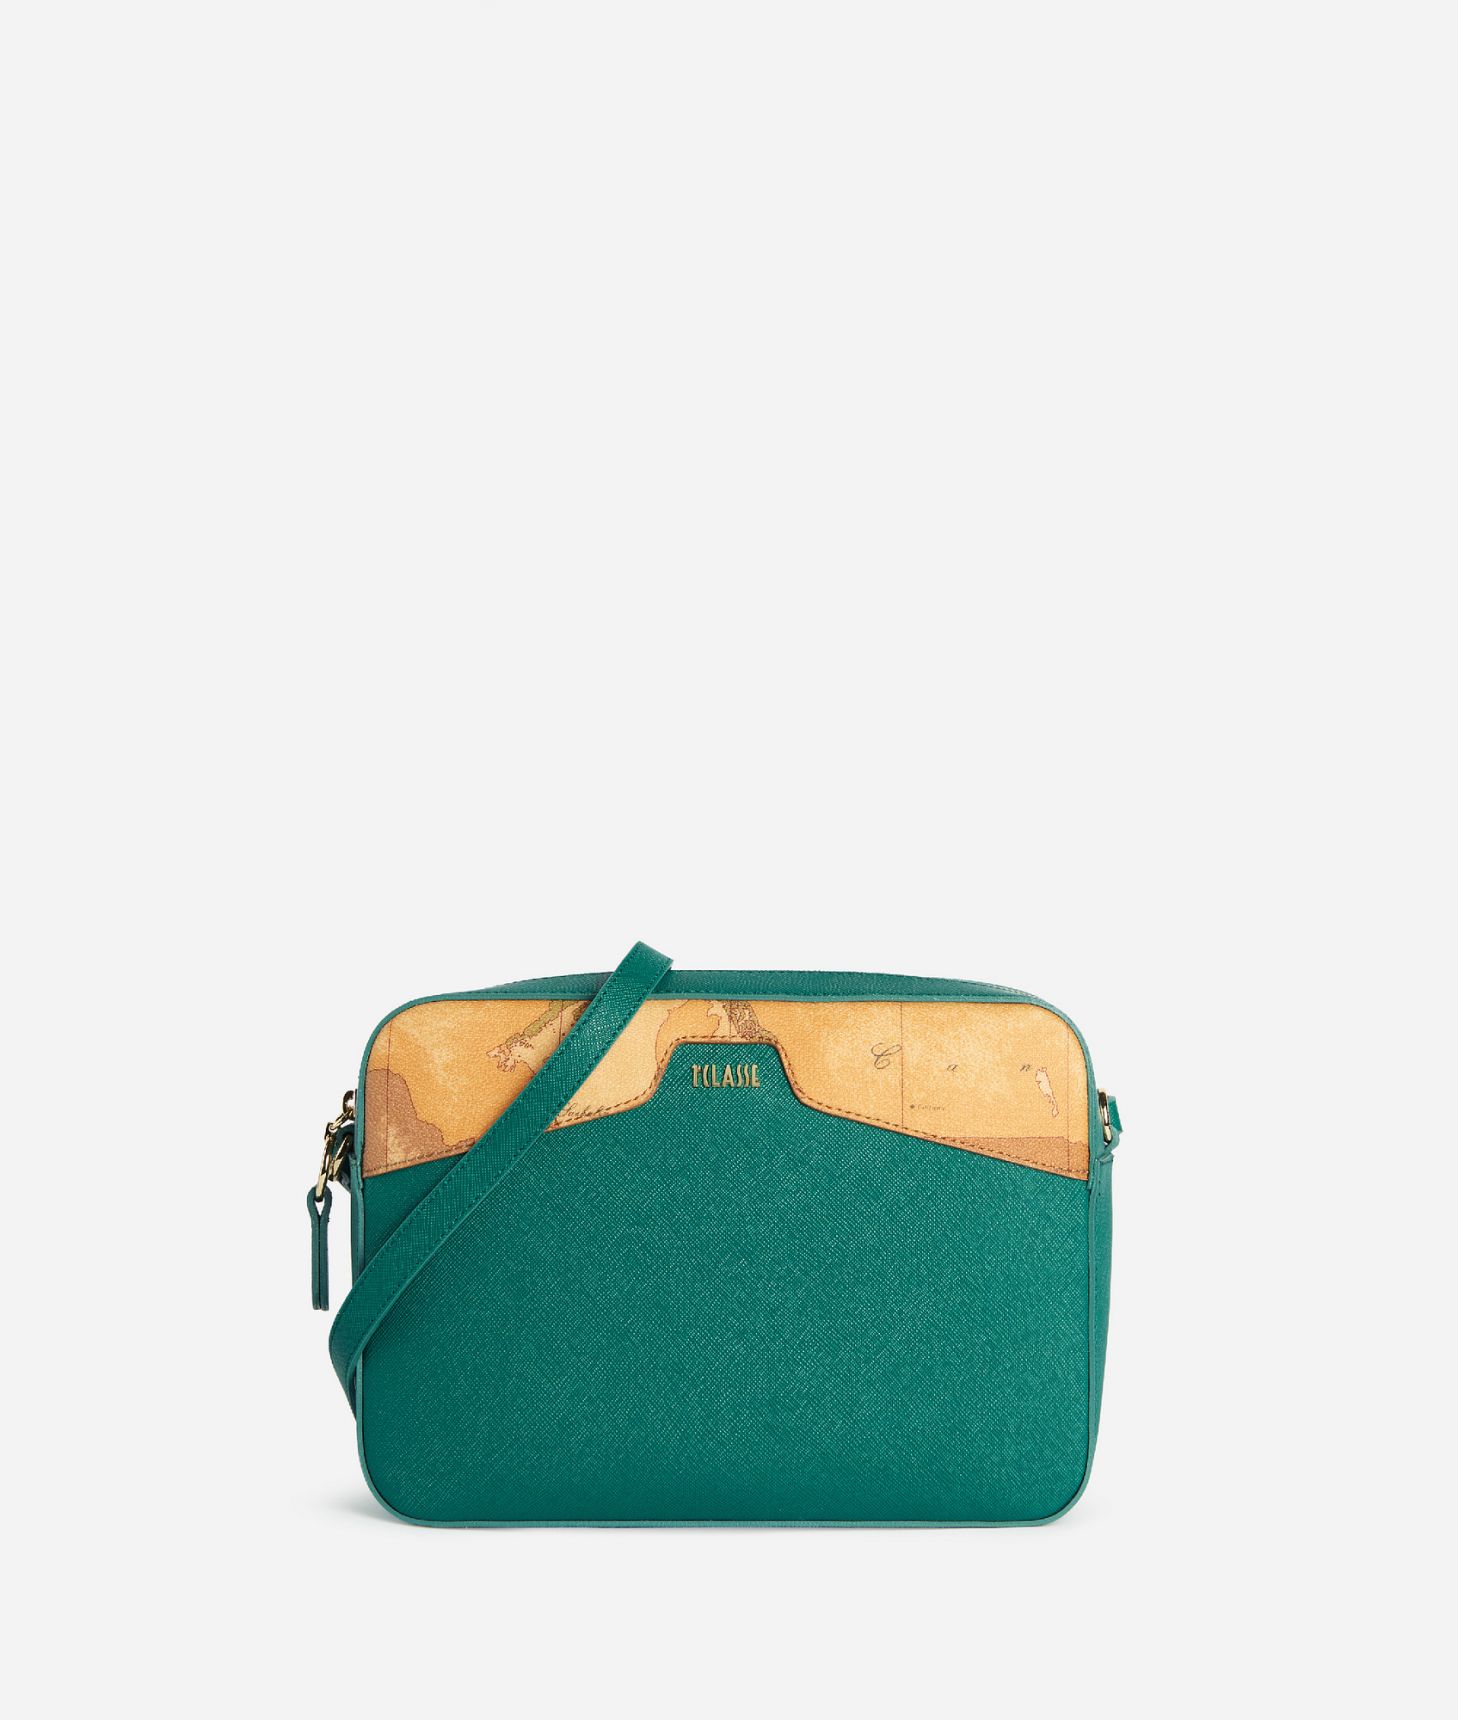 Glam City reporter bag Emerald Green,front